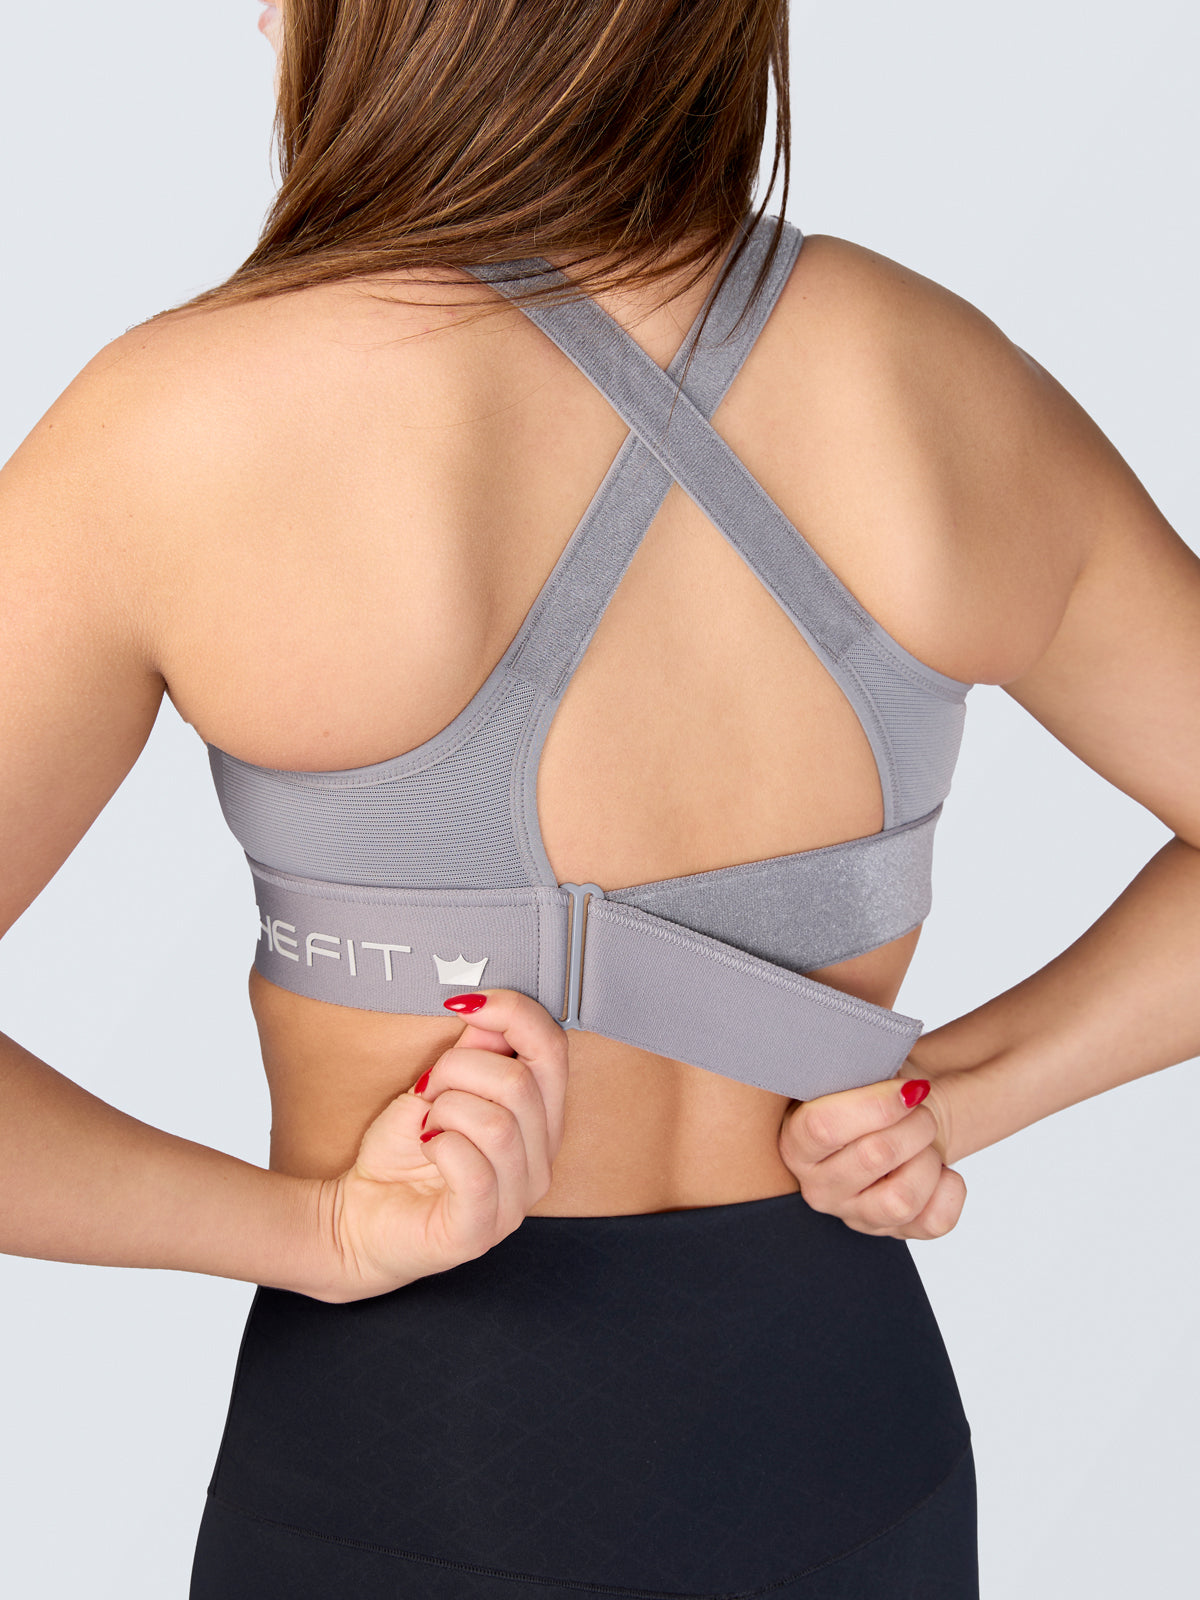 Looking for a High Impact Sports Bra for Horse Riding? – SportsBra